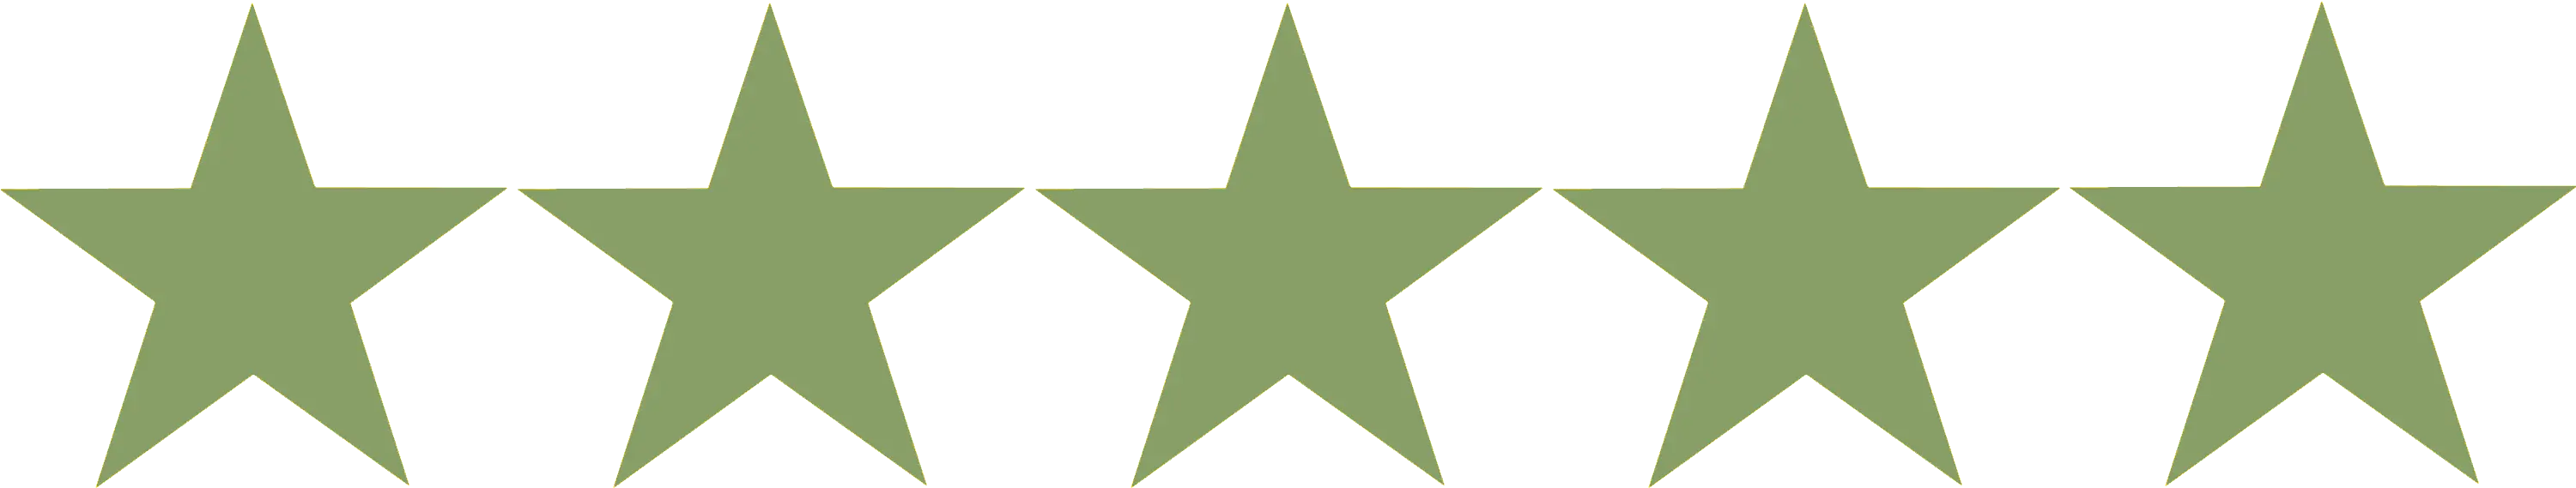 Review Stars